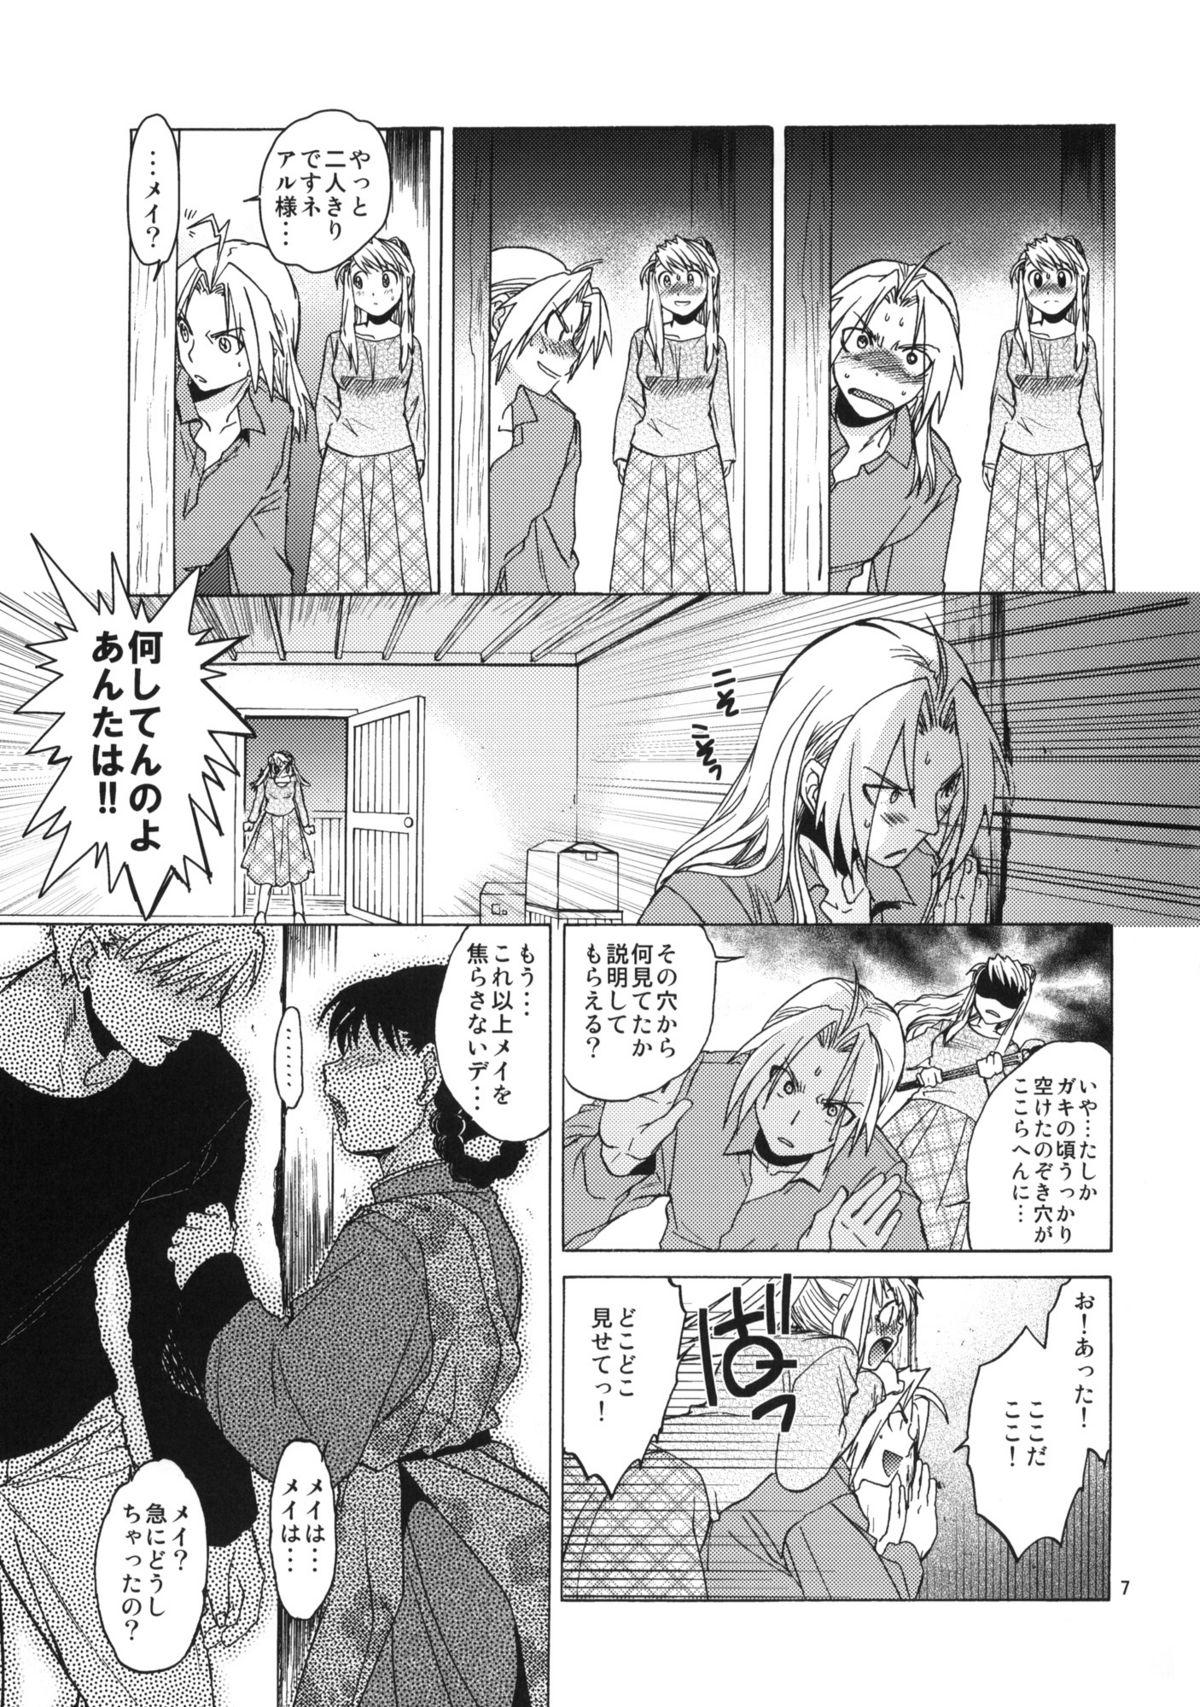 Sucking Dick EDxWIN 5 Al x May! - Fullmetal alchemist Babes - Page 6